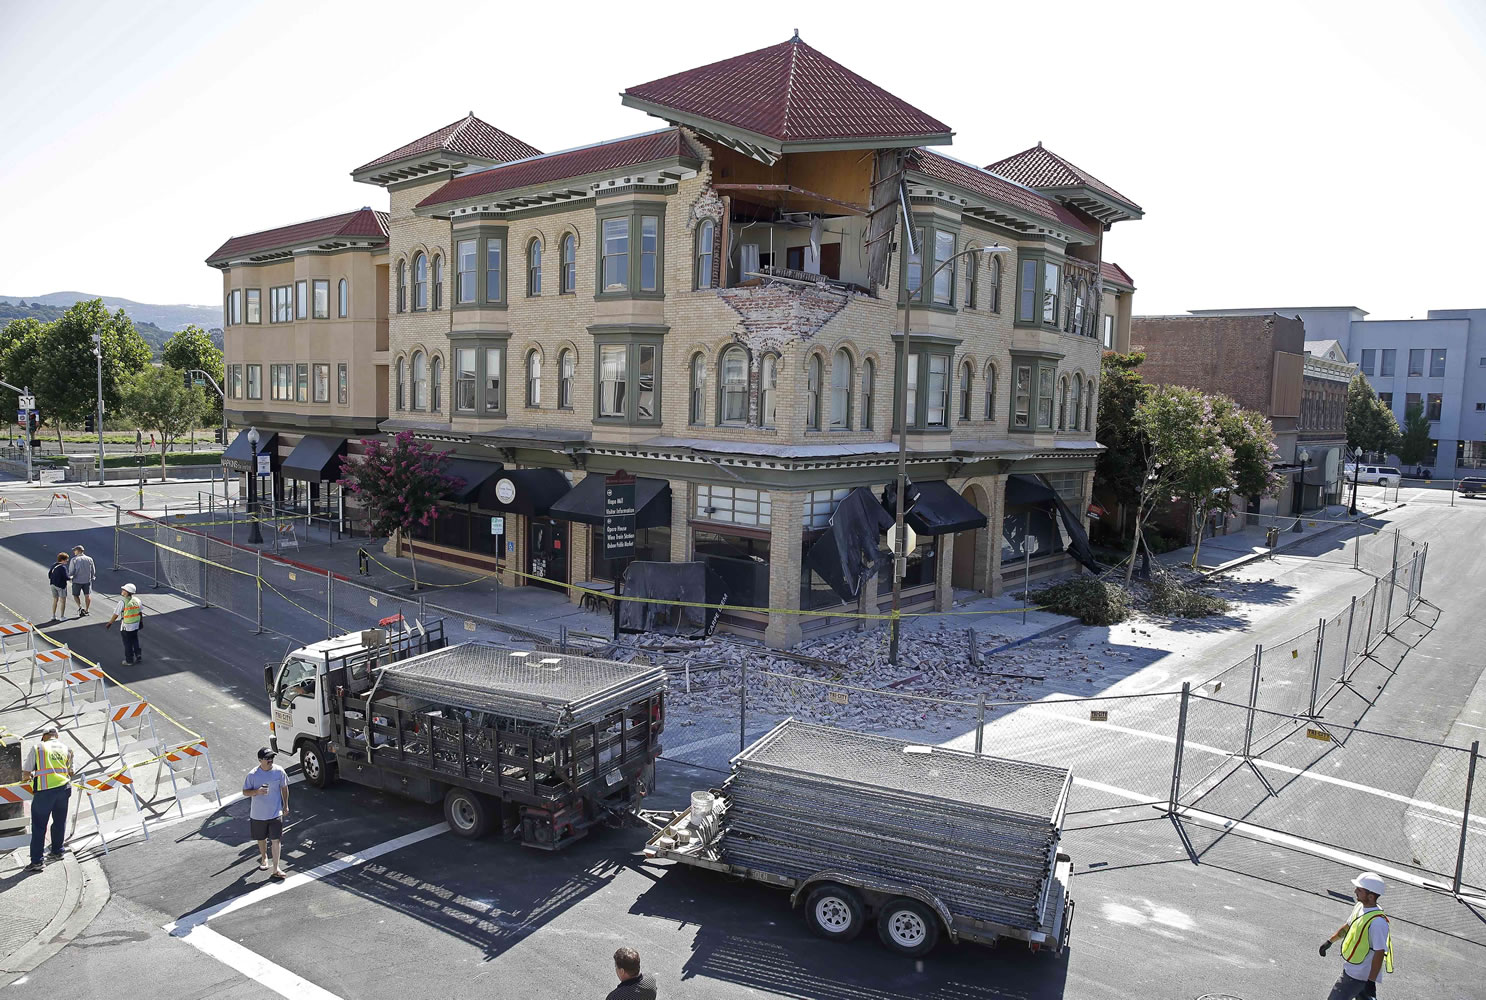 Photos by Eric Risberg/Associated Press
A truckload of fencing is brought to Second Street outside the earthquake-damaged building that housed the Carpe Diem wine bar Tuesday in Napa, Calif. A number of blocks were fenced off in the downtown area.